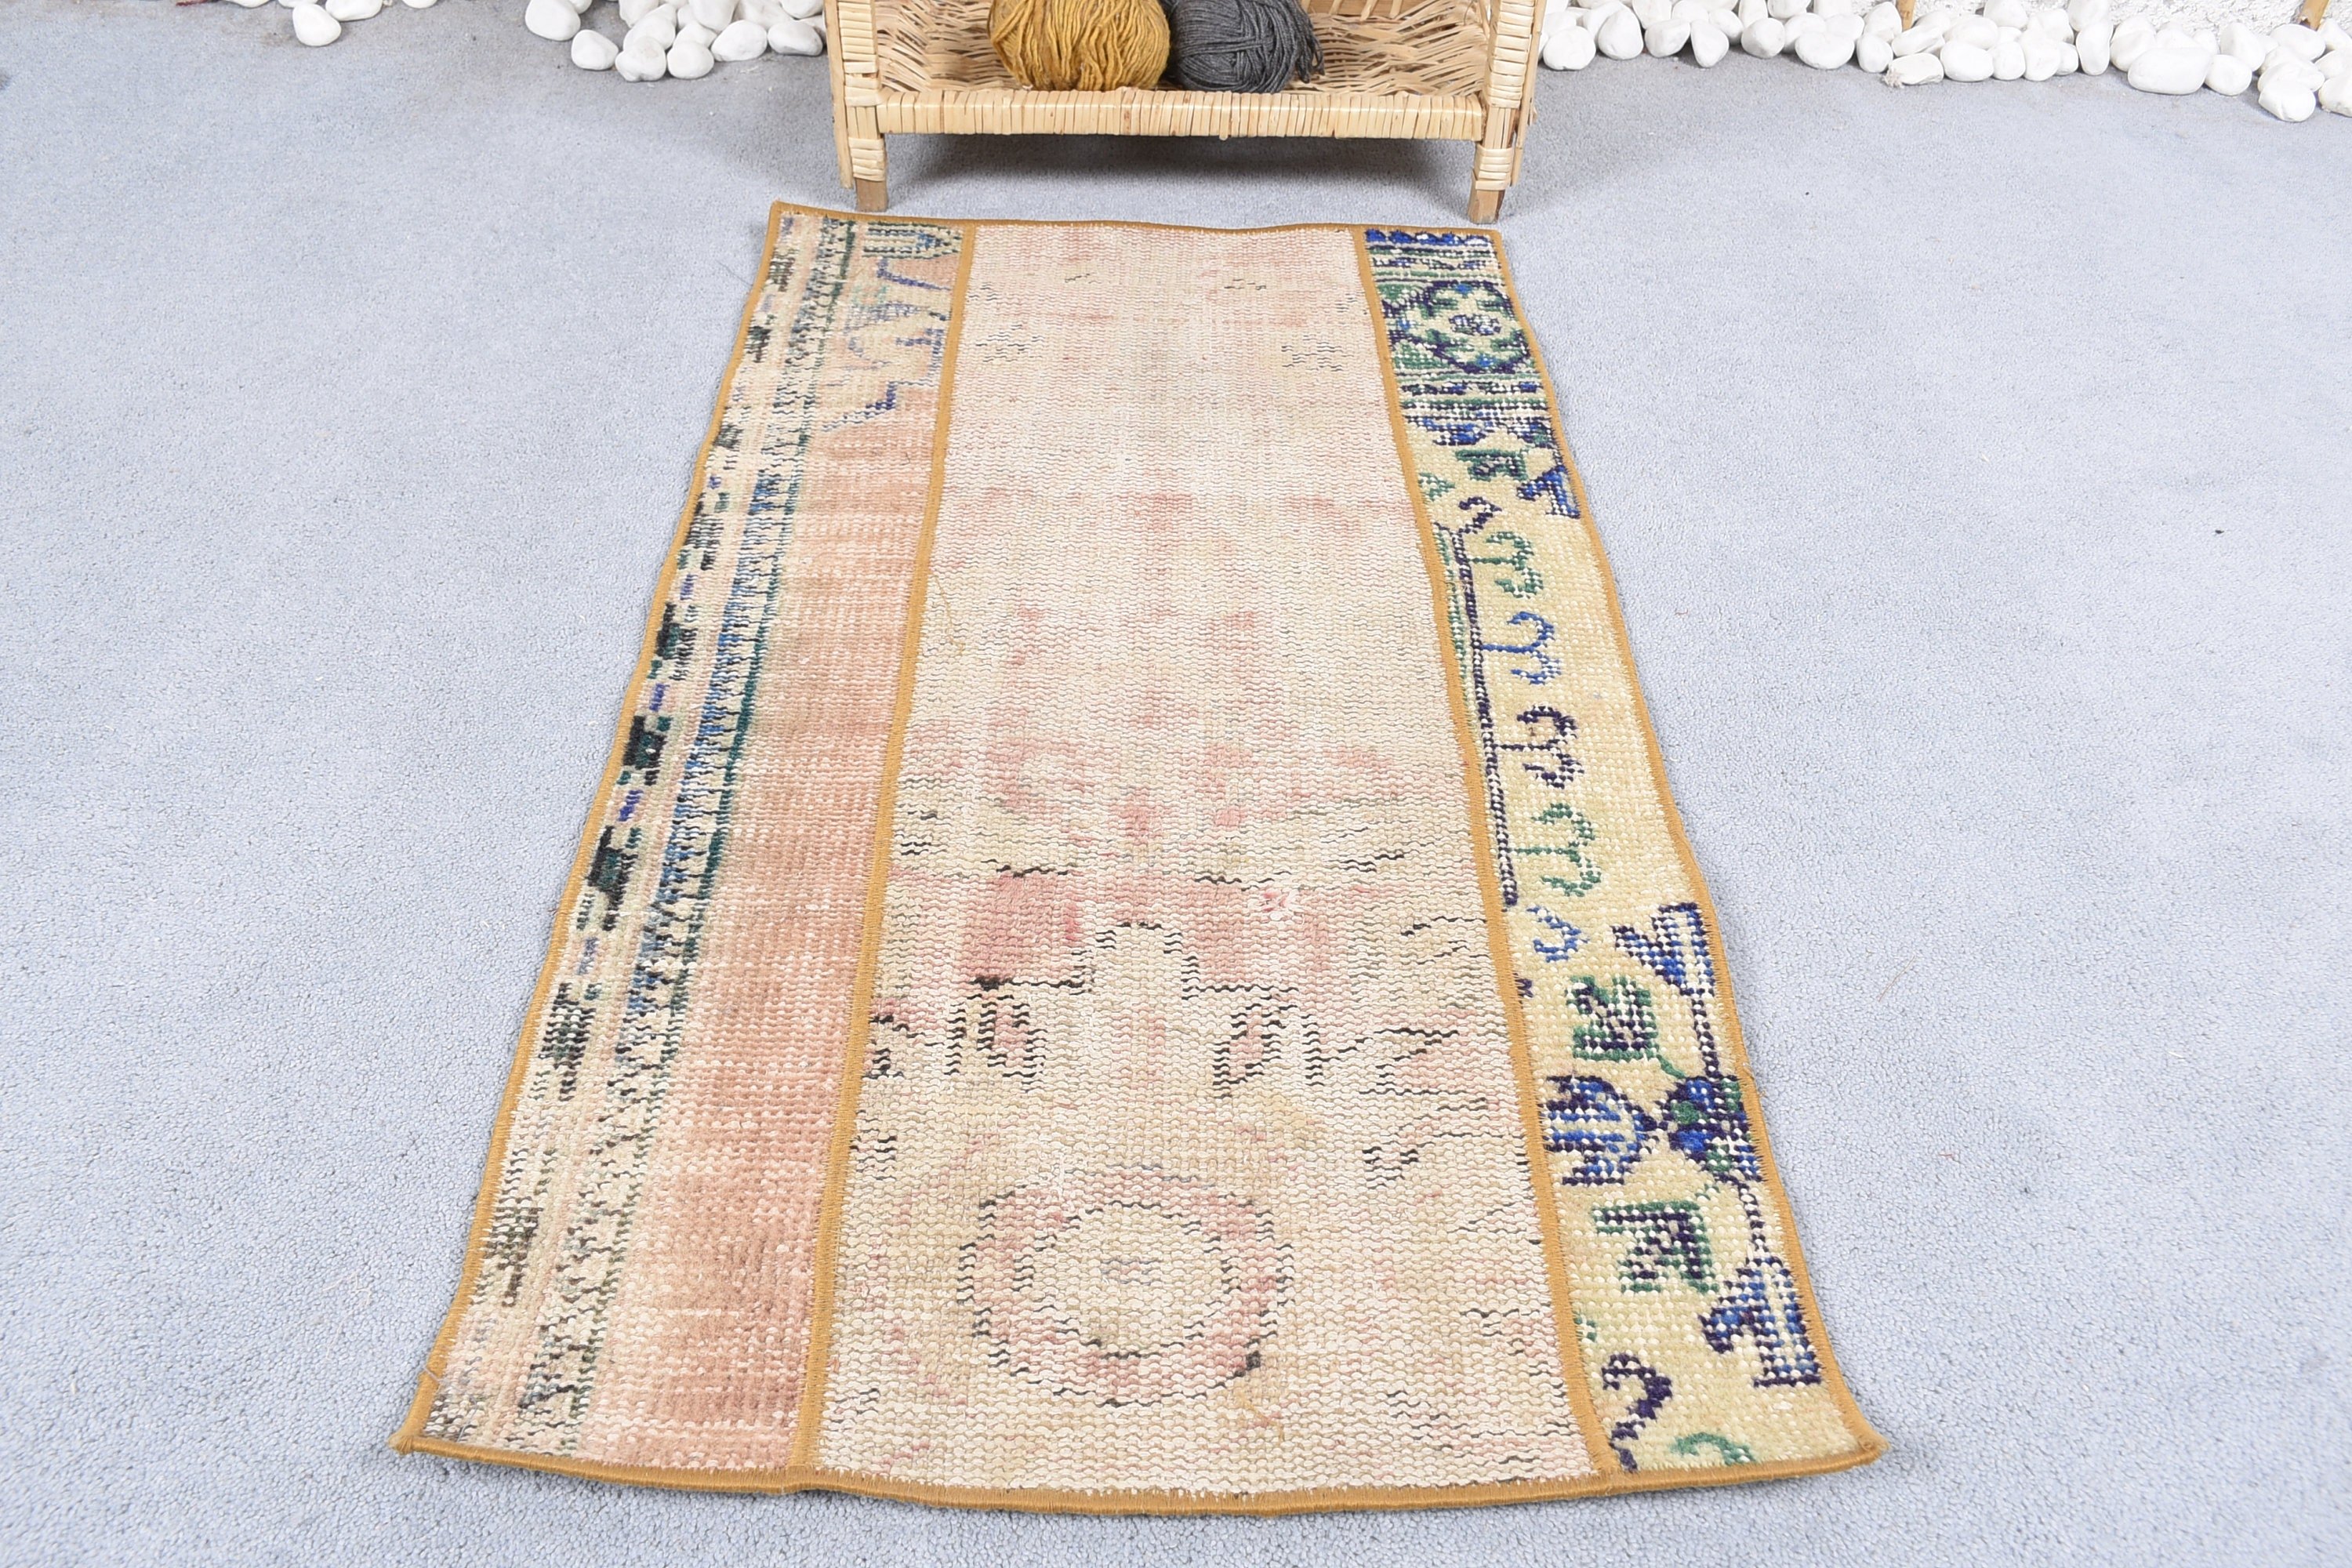 Vintage Rugs, Home Decor Rug, Kitchen Rugs, Moroccan Rug, Rugs for Bath, Turkish Rugs, 1.7x3.2 ft Small Rug, Nursery Rugs, Beige Cool Rugs